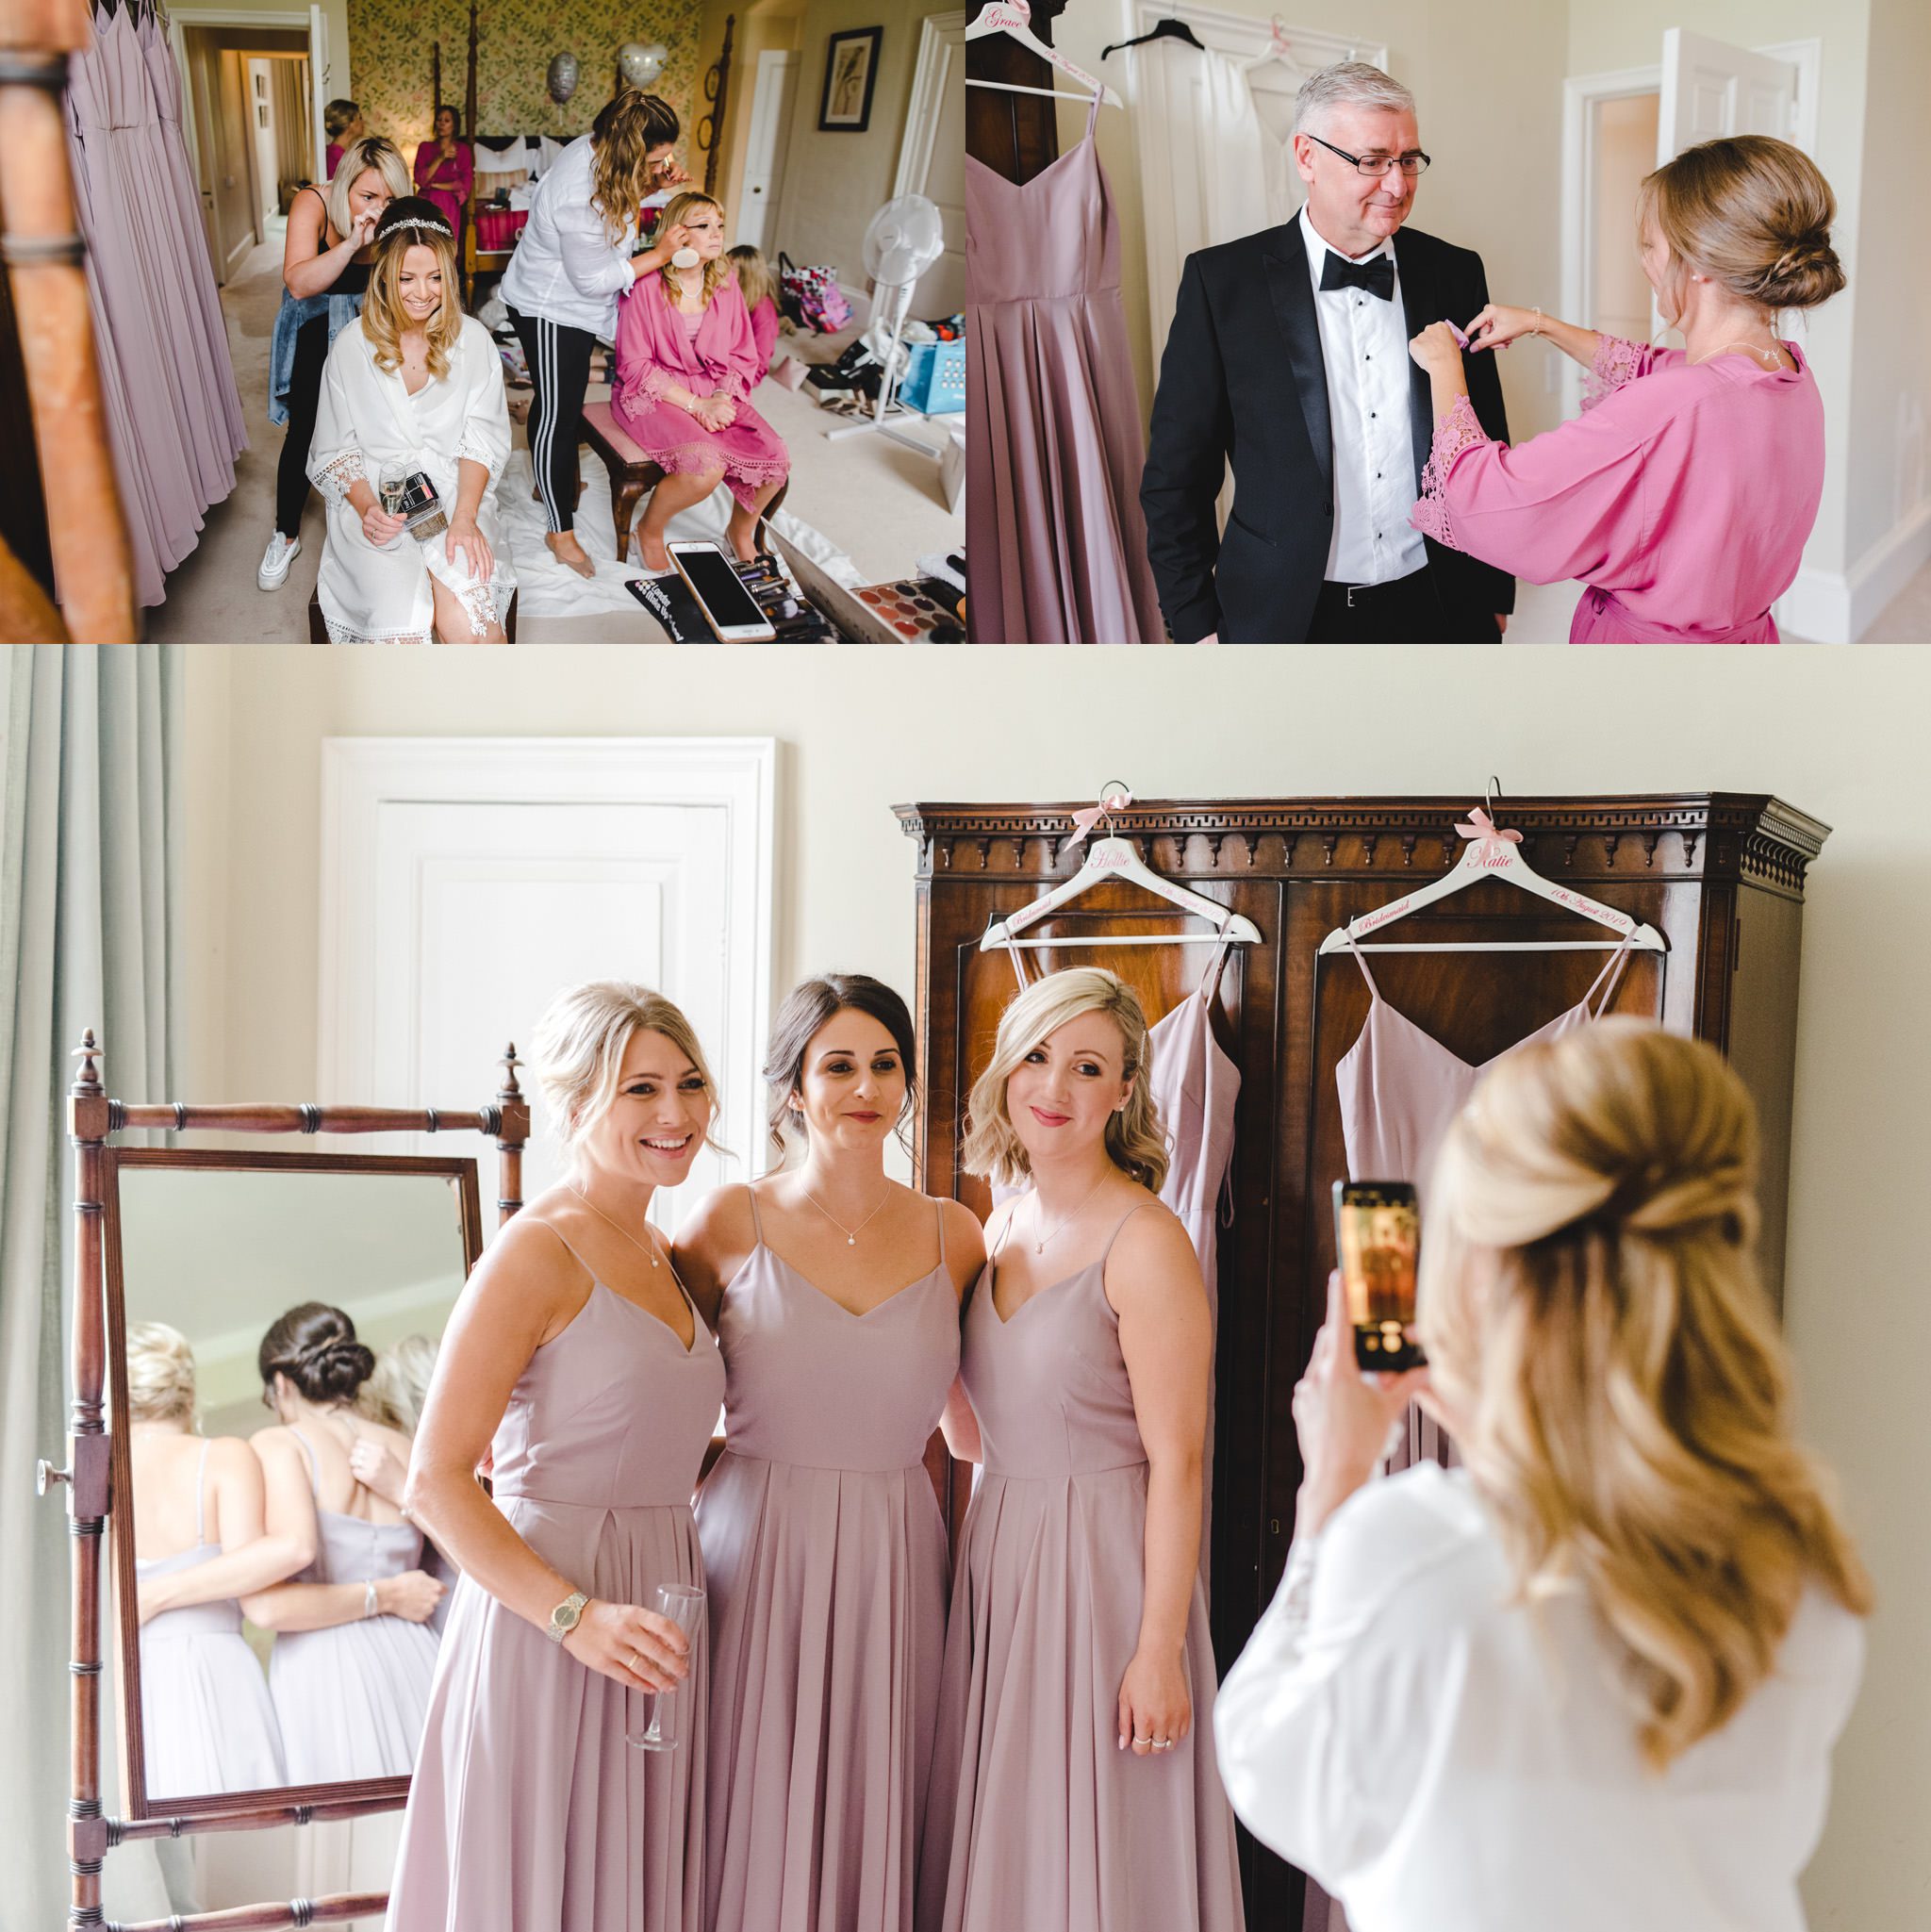 A bride and her bridesmaids getting ready for a wedding